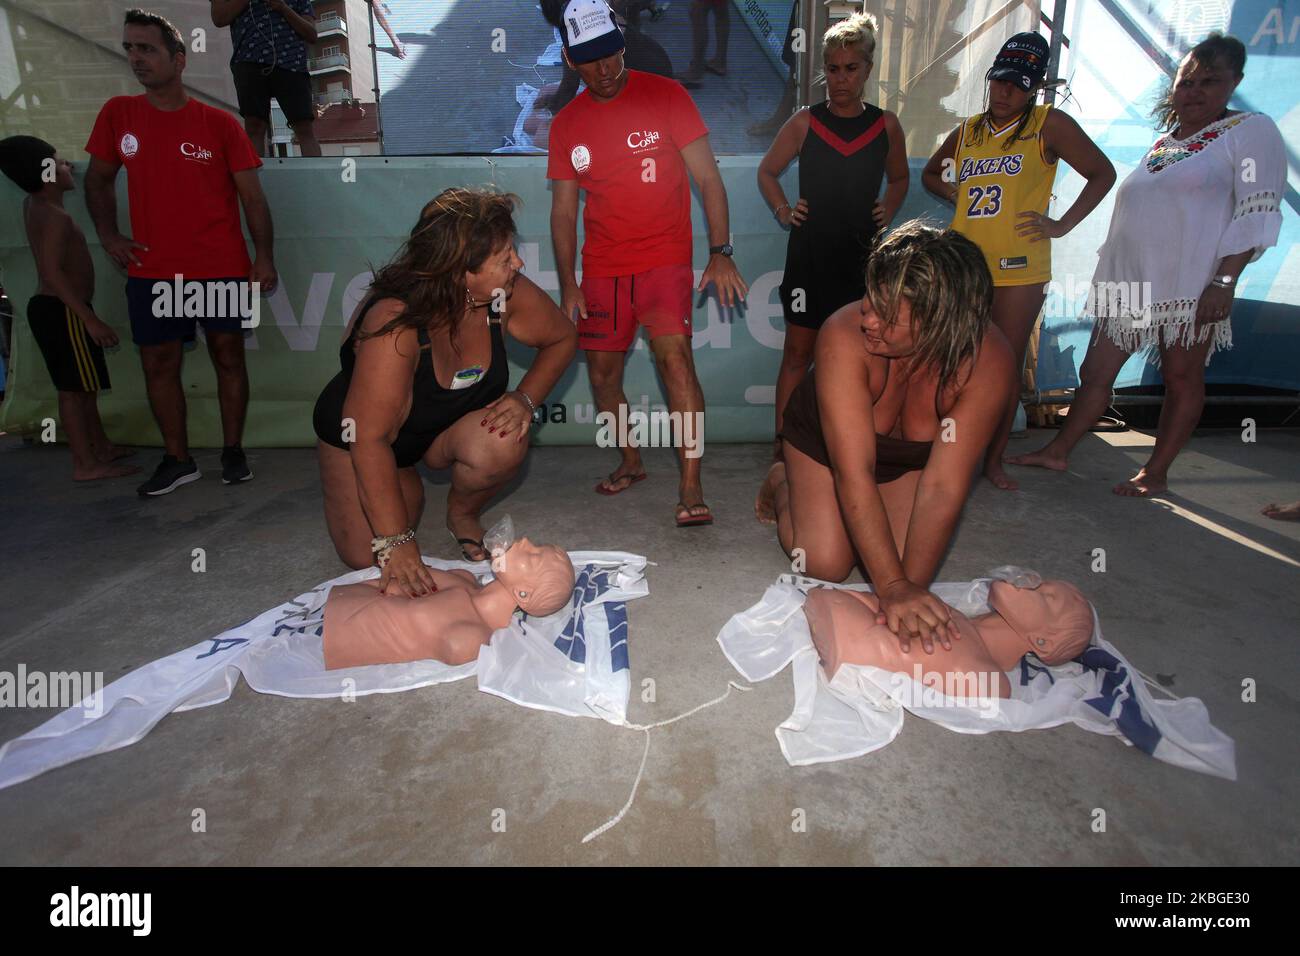 People practice a cardiac massage during the resuscitation training during a CPR and first aid training in San Bernardo, La Costa party, Argentina on January 24, 2020. (Photo by Carol Smiljan/NurPhoto) Stock Photo